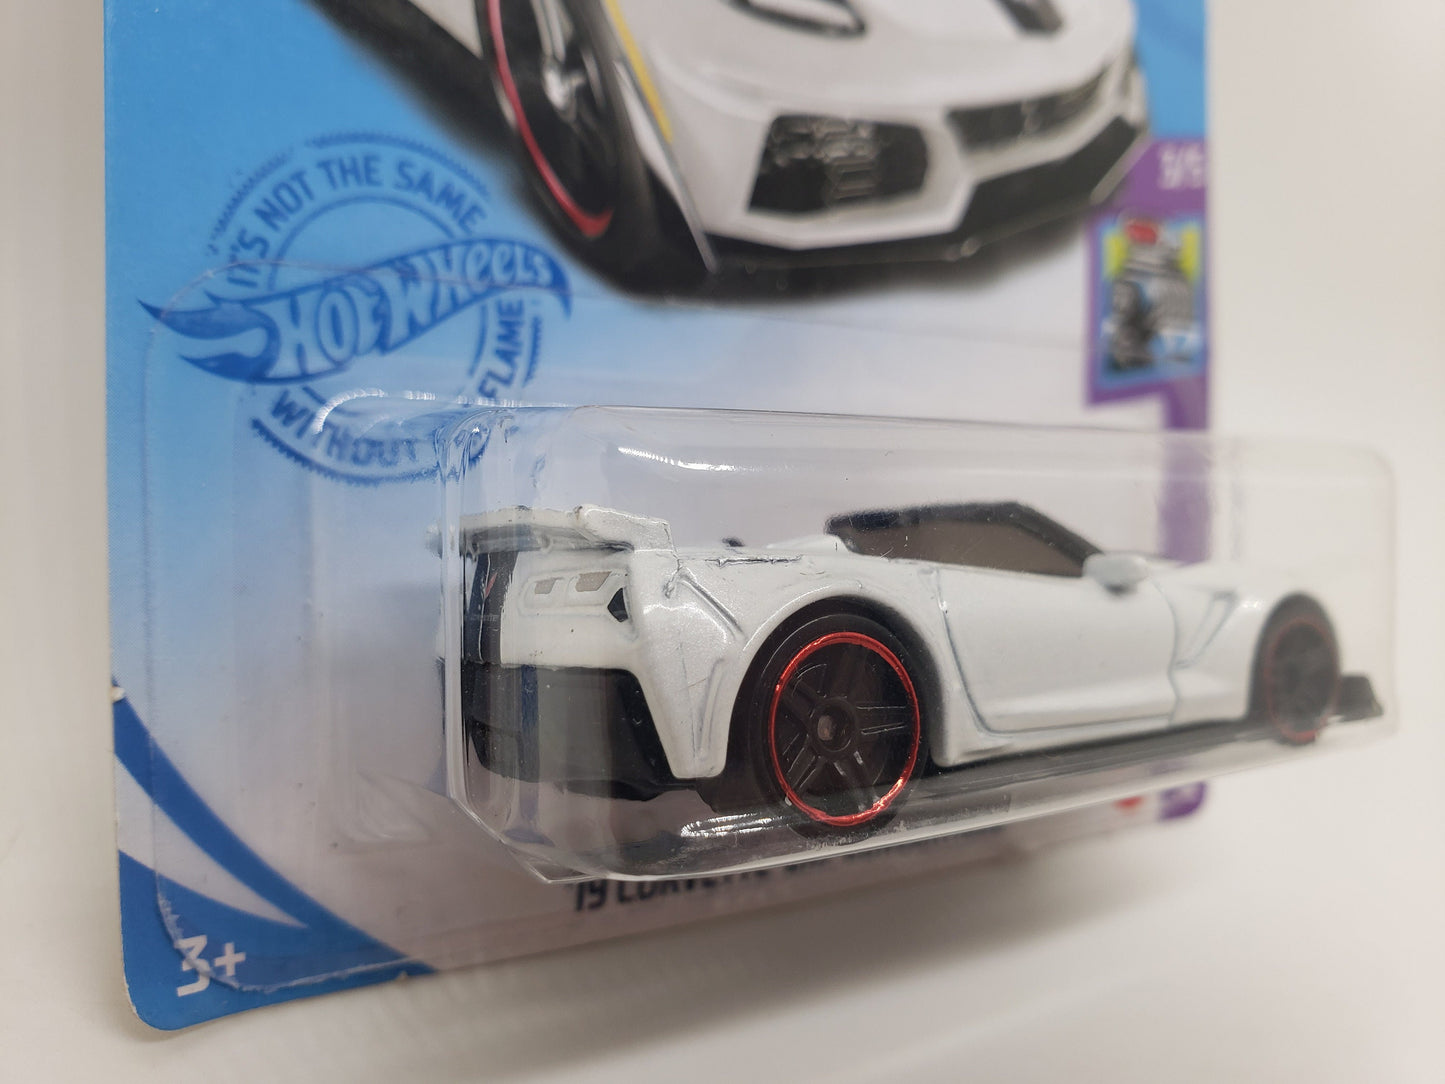 Hot Wheels Corvette ZR1 Convertible White HW Torque Perfect Birthday Gift Miniature Collectable Model Toy Car